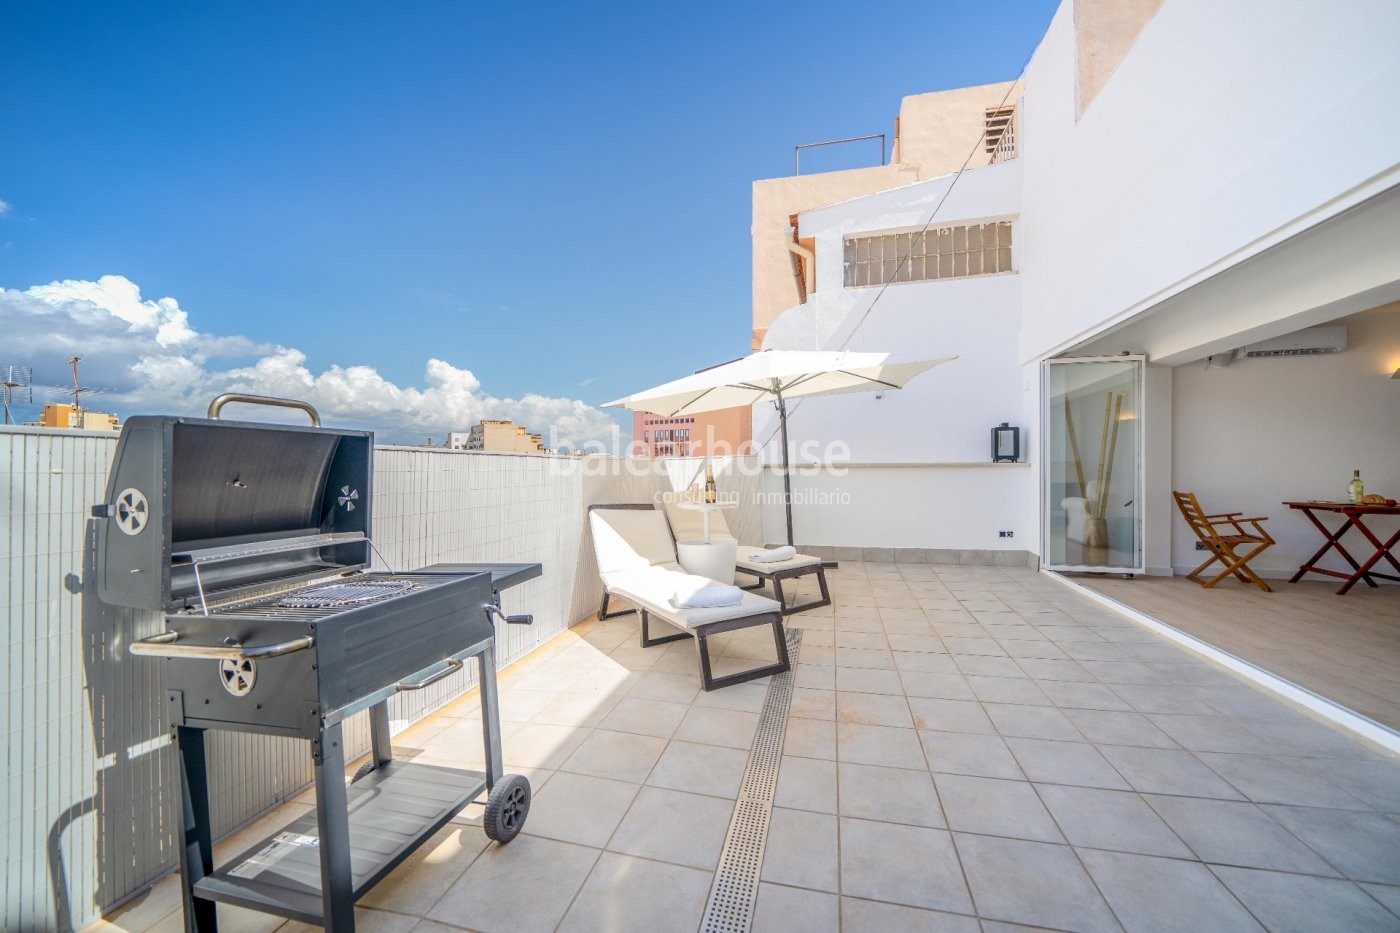 Excellent penthouse in the centre of Palma with a large terrace and light-filled interiors.